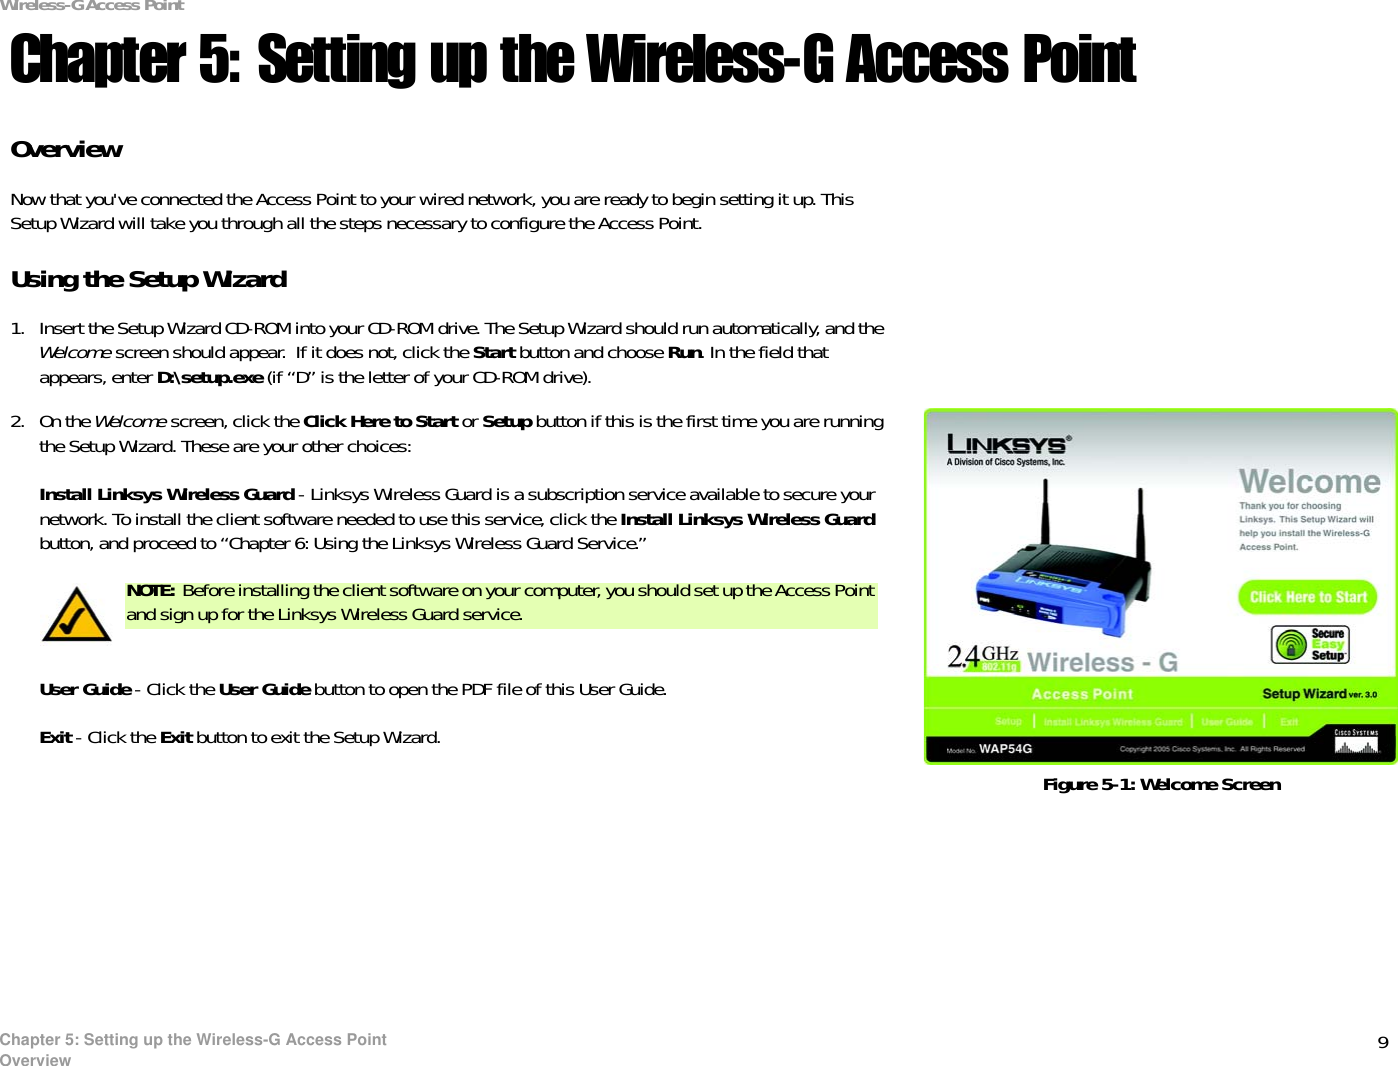 9Chapter 5: Setting up the Wireless-G Access PointOverviewWireless-G Access PointChapter 5: Setting up the Wireless-G Access PointOverviewNow that you&apos;ve connected the Access Point to your wired network, you are ready to begin setting it up. This Setup Wizard will take you through all the steps necessary to configure the Access Point.Using the Setup Wizard1. Insert the Setup Wizard CD-ROM into your CD-ROM drive. The Setup Wizard should run automatically, and the Welcome screen should appear.  If it does not, click the Start button and choose Run. In the field that appears, enter D:\setup.exe (if “D” is the letter of your CD-ROM drive).2. On the Welcome screen, click the Click Here to Start or Setup button if this is the first time you are running the Setup Wizard. These are your other choices:Install Linksys Wireless Guard - Linksys Wireless Guard is a subscription service available to secure your network. To install the client software needed to use this service, click the Install Linksys Wireless Guardbutton, and proceed to “Chapter 6: Using the Linksys Wireless Guard Service.” User Guide - Click the User Guide button to open the PDF file of this User Guide.Exit - Click the Exit button to exit the Setup Wizard.Figure 5-1: Welcome ScreenNOTE: Before installing the client software on your computer, you should set up the Access Point and sign up for the Linksys Wireless Guard service.